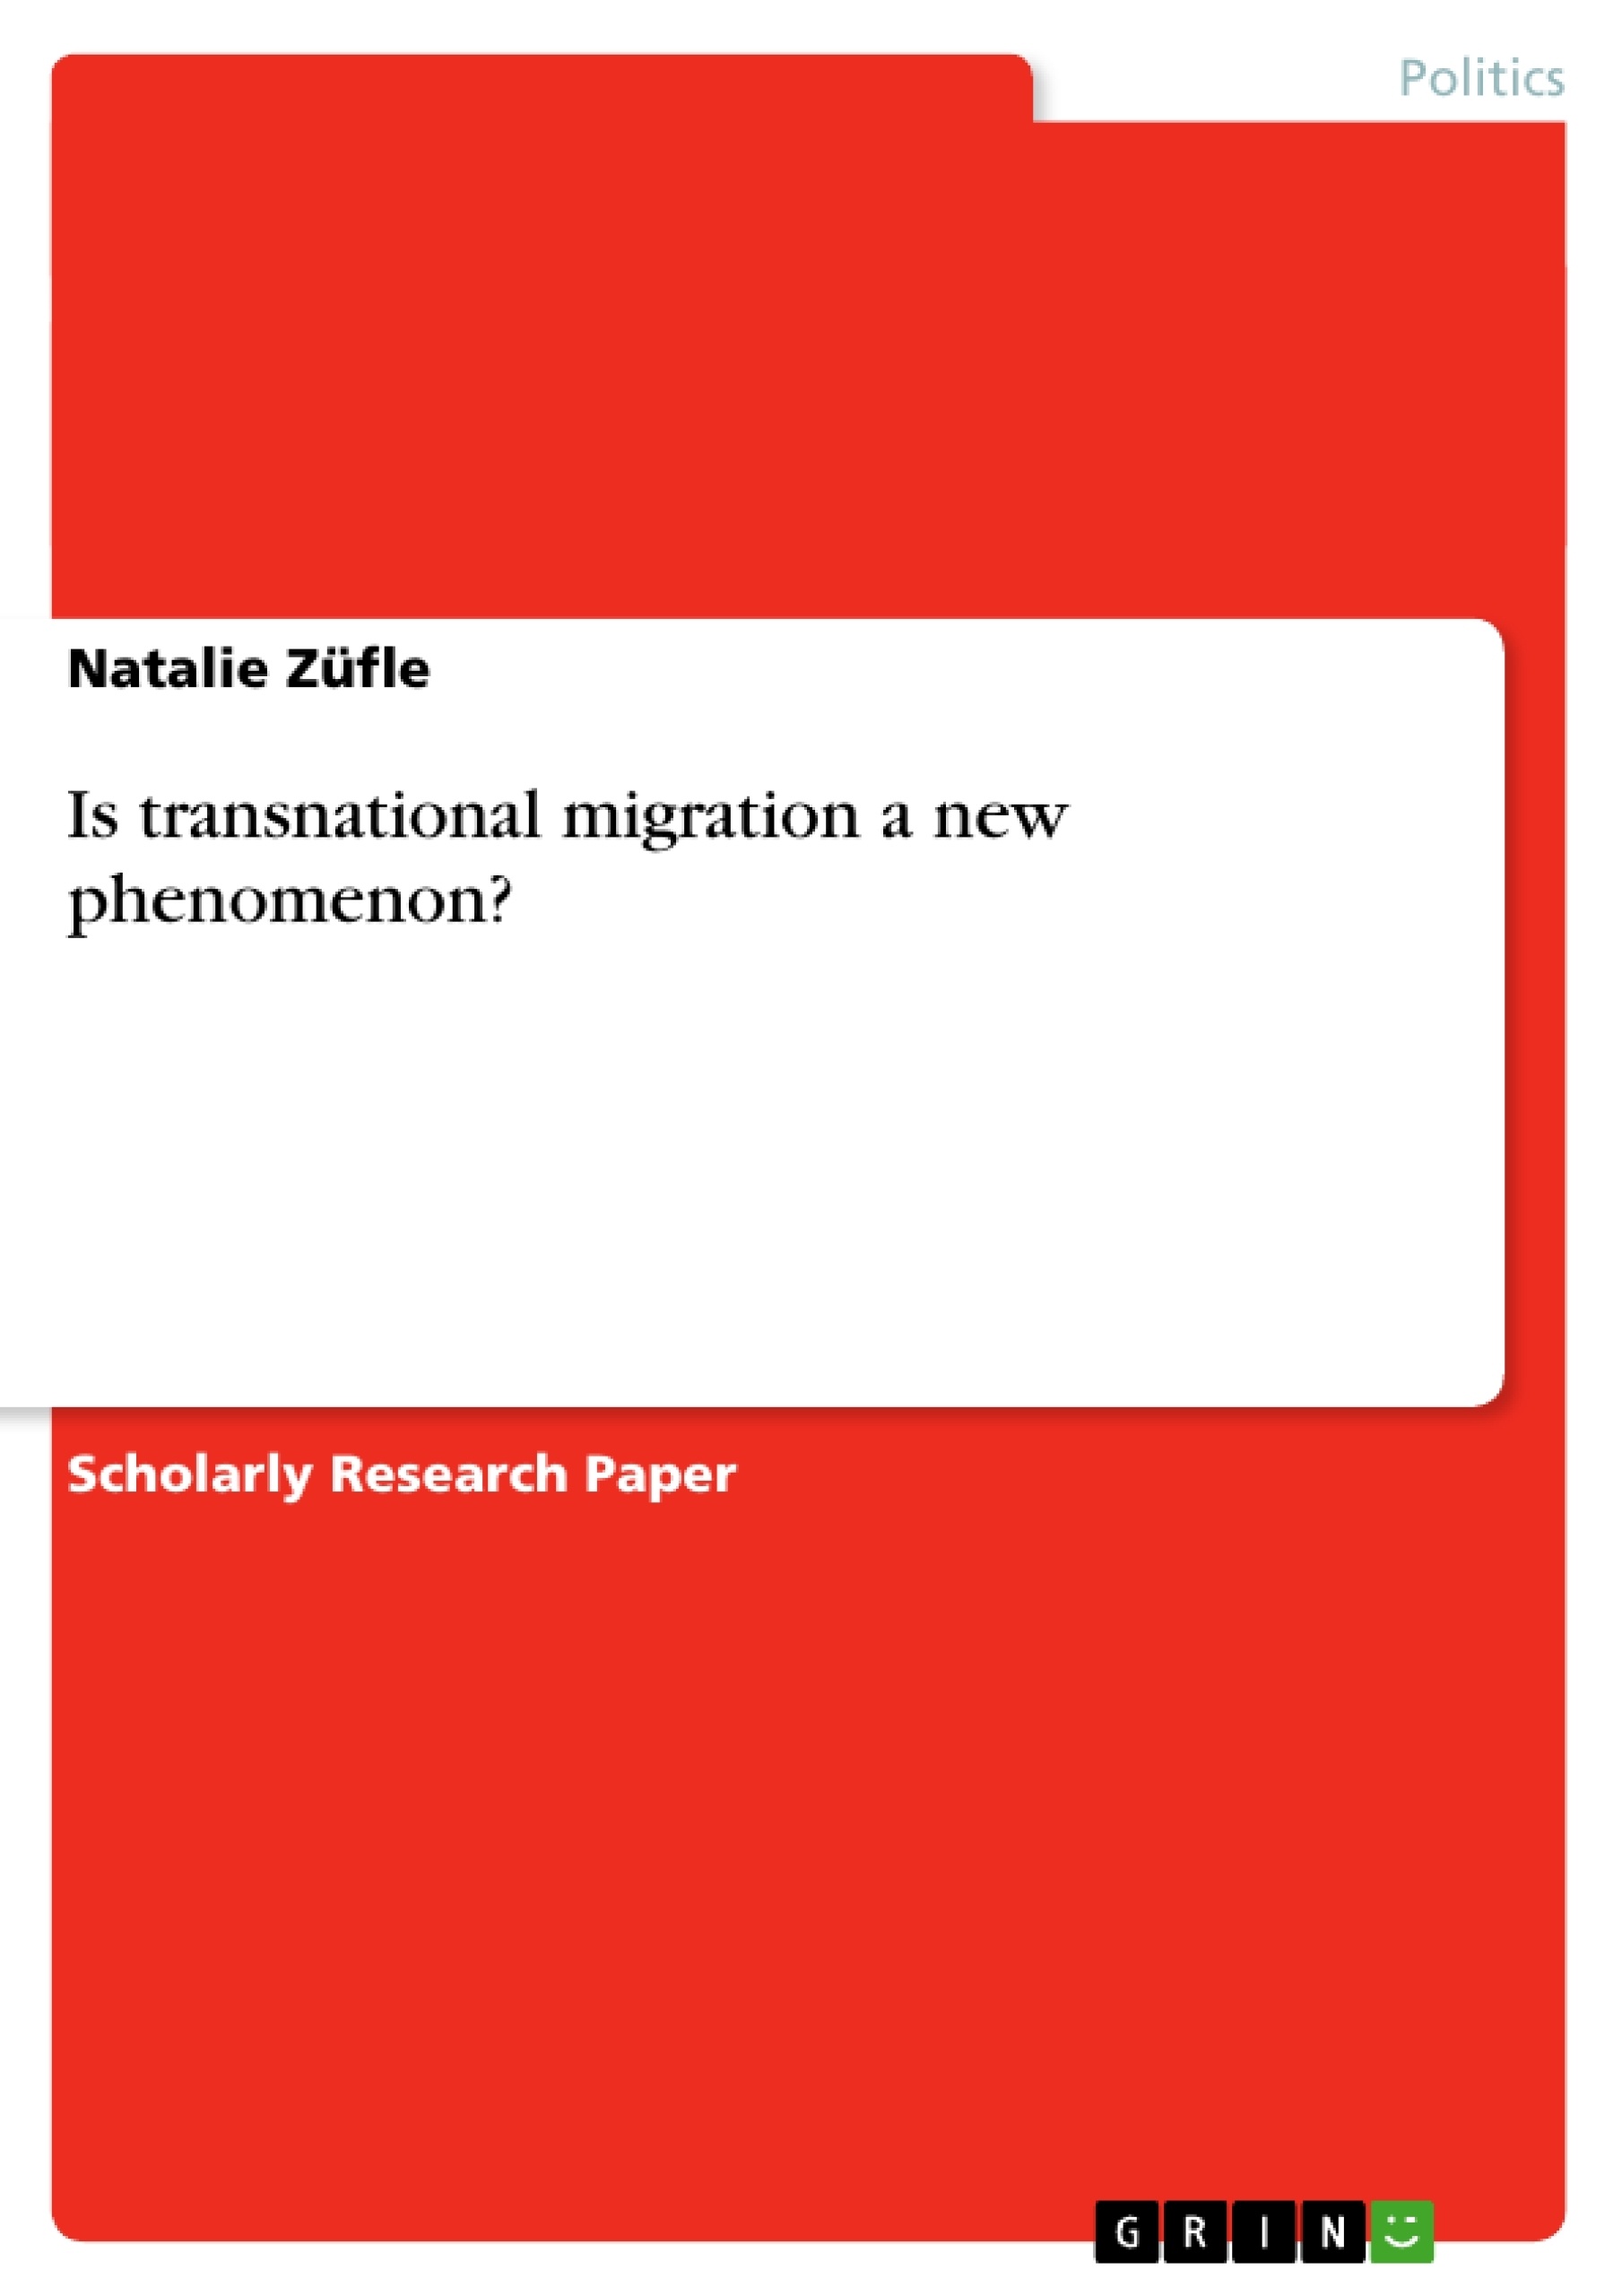 Title: Is transnational migration a new phenomenon?